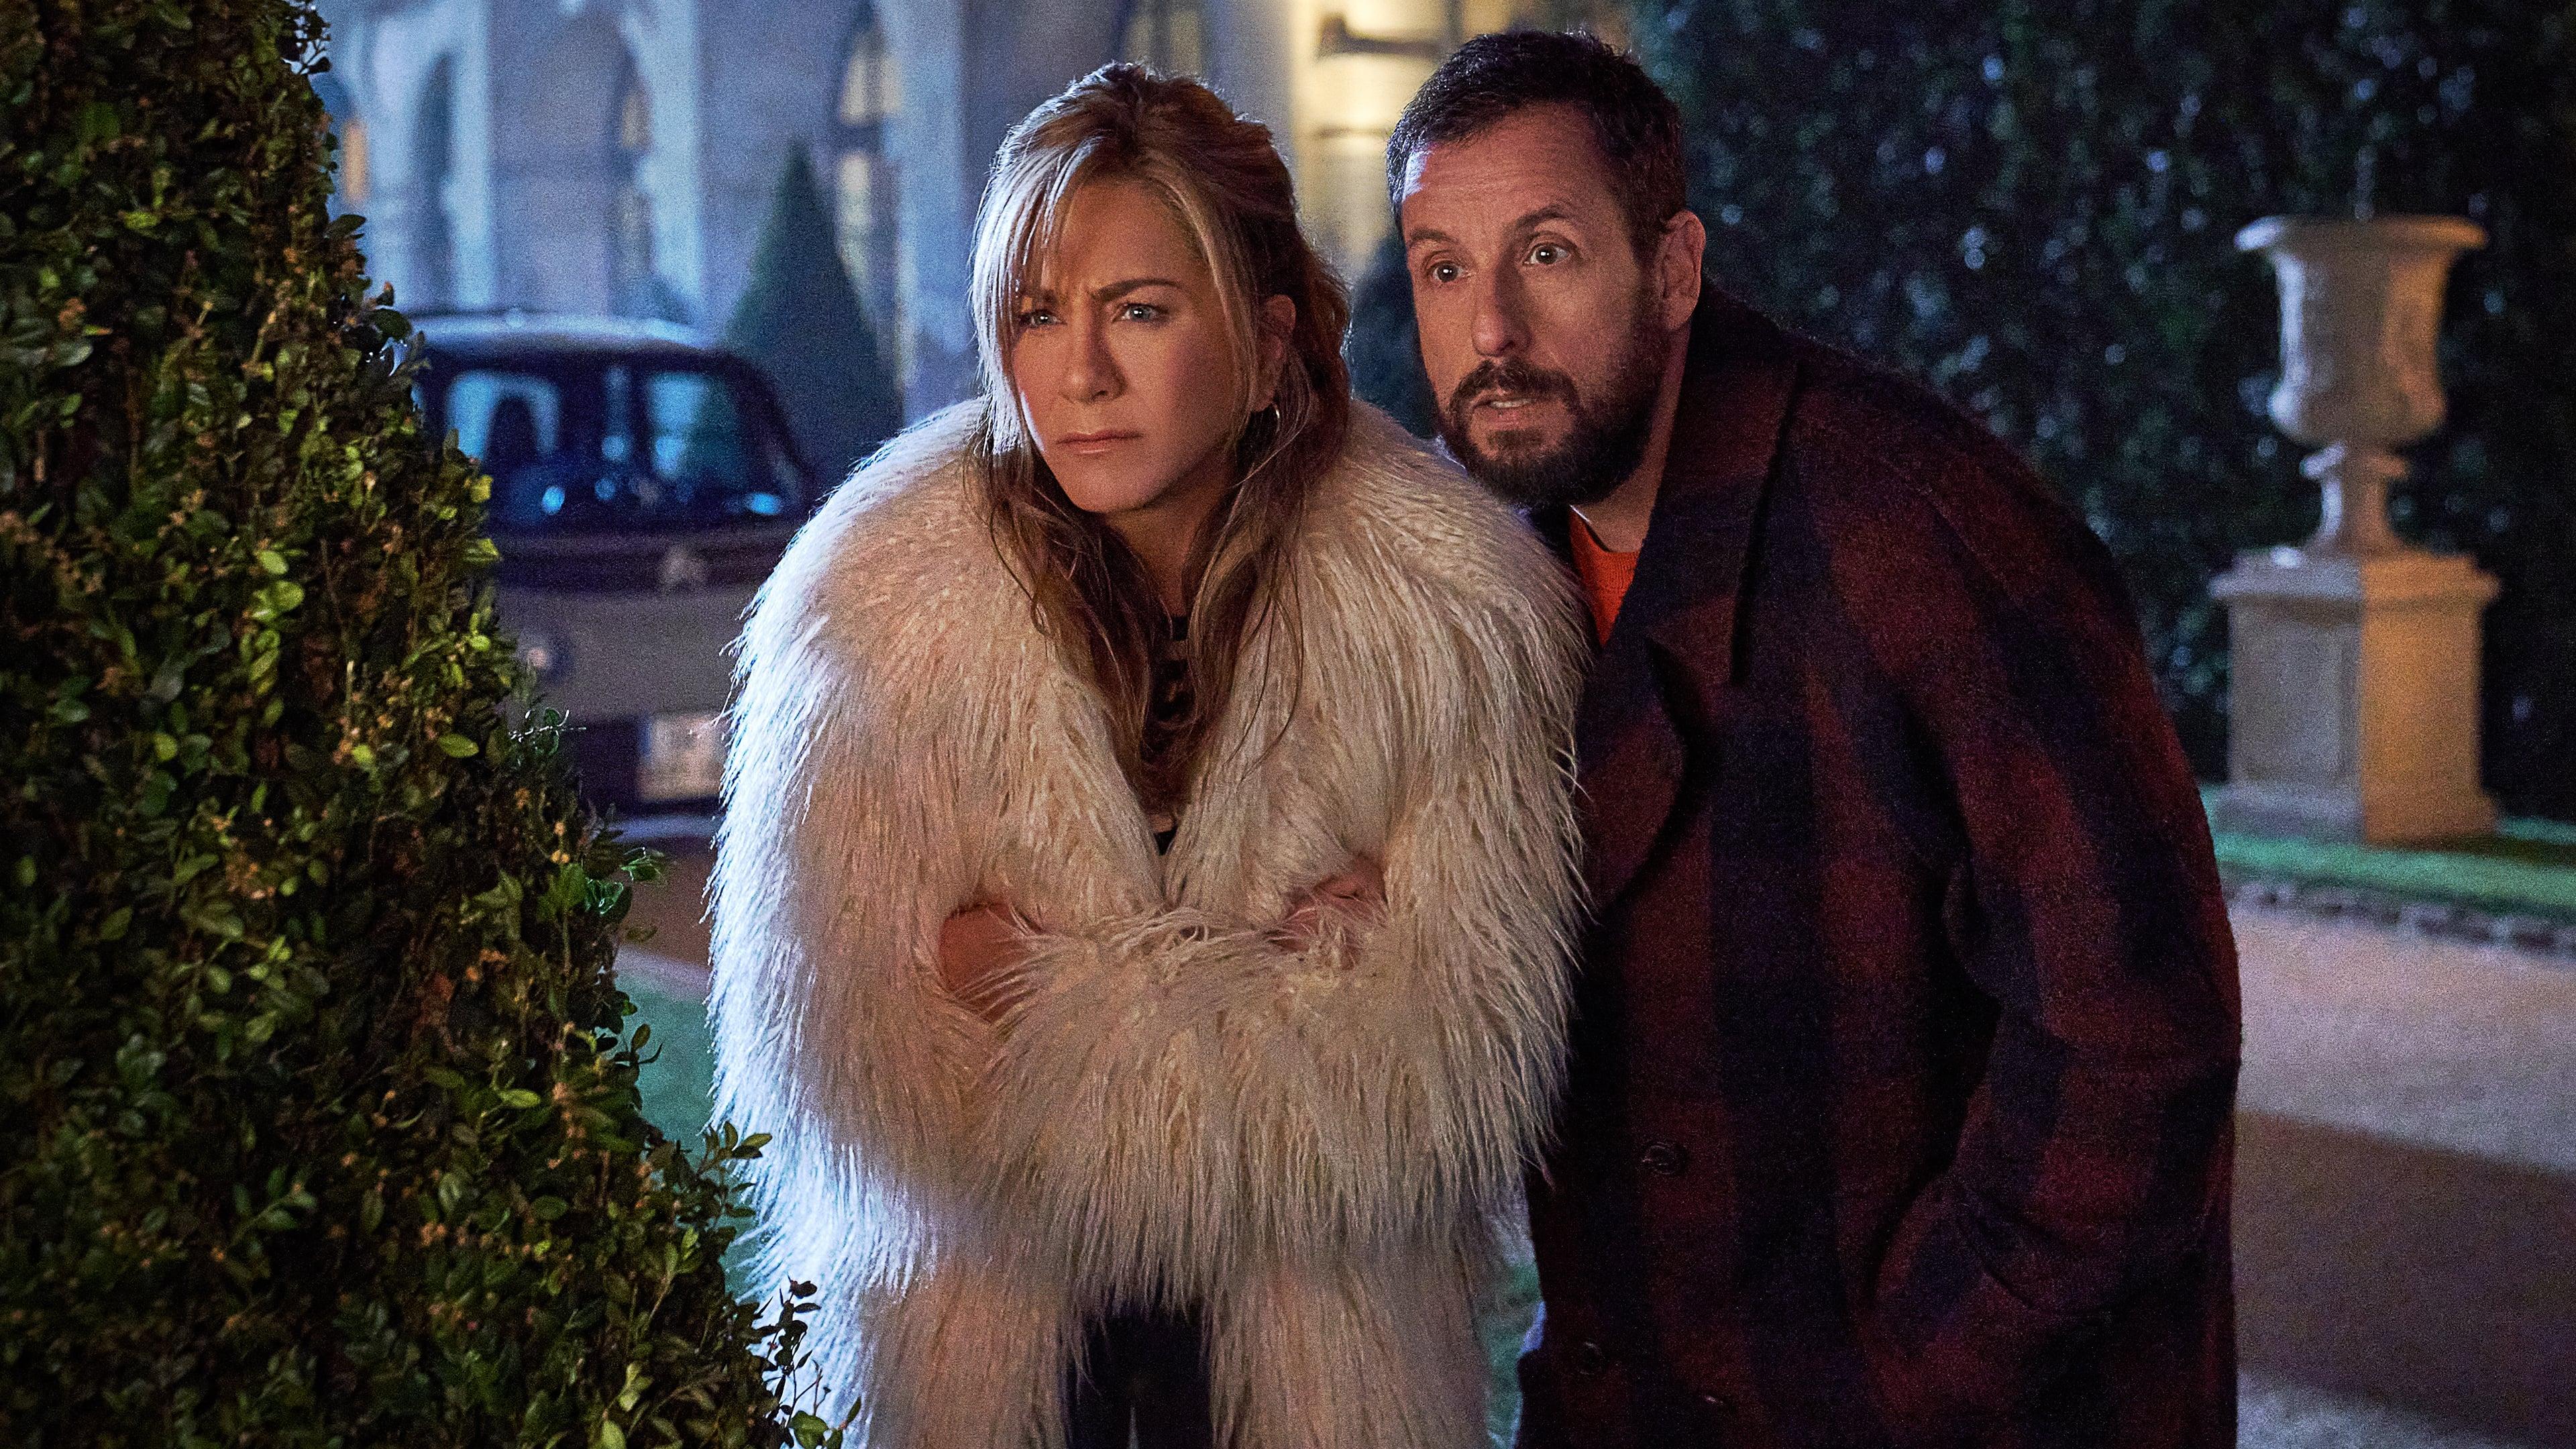 Jennifer Aniston wears a fuzzy coat as she stands to the left of Adam Sandler in this still from Netflix's 'Murder Mystery 2.'